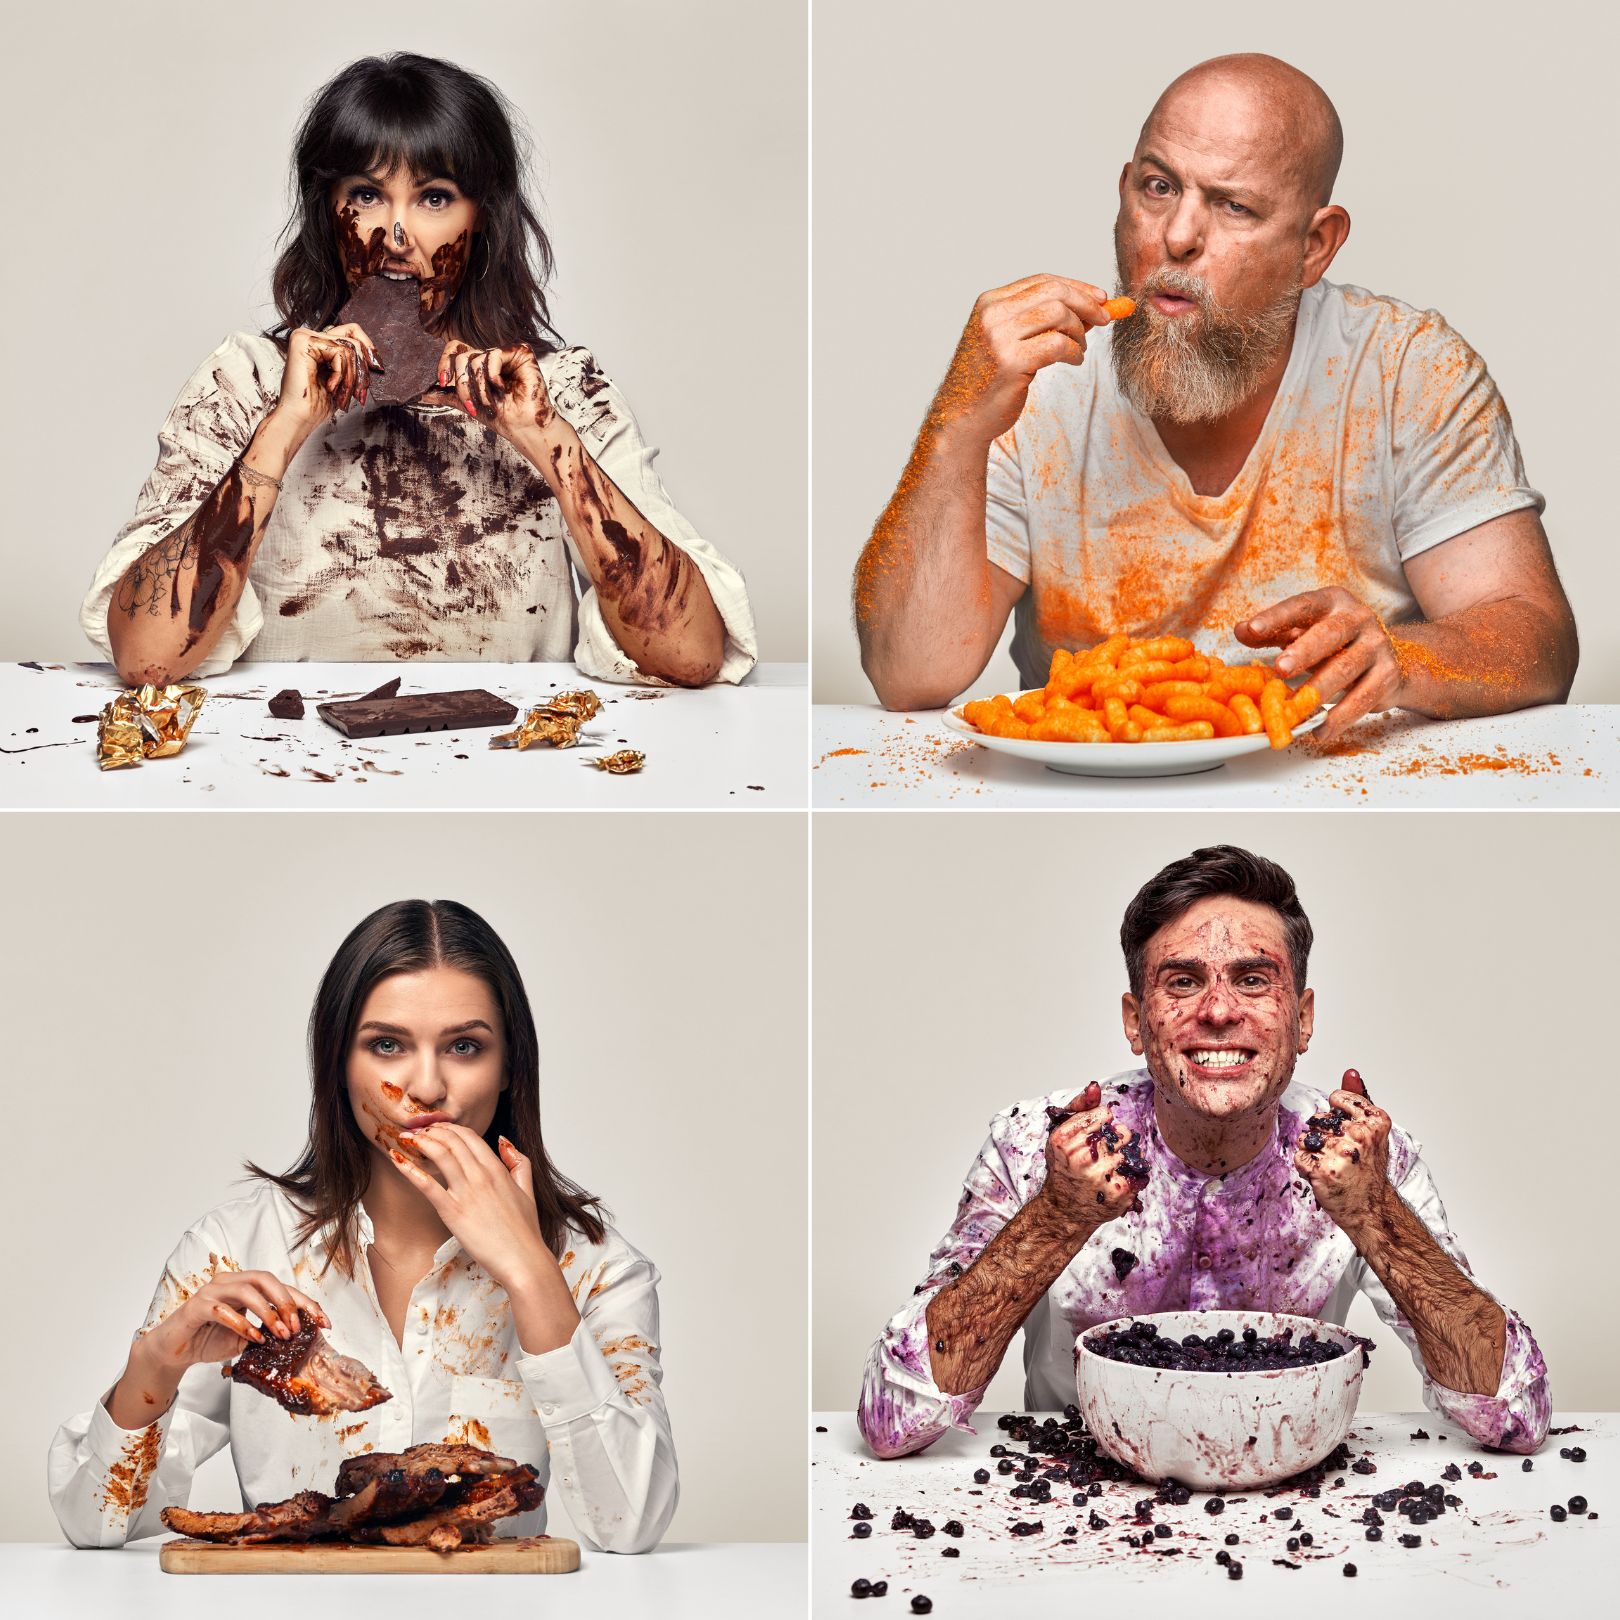 Collection of editorial portraits of people covered in Messy Food